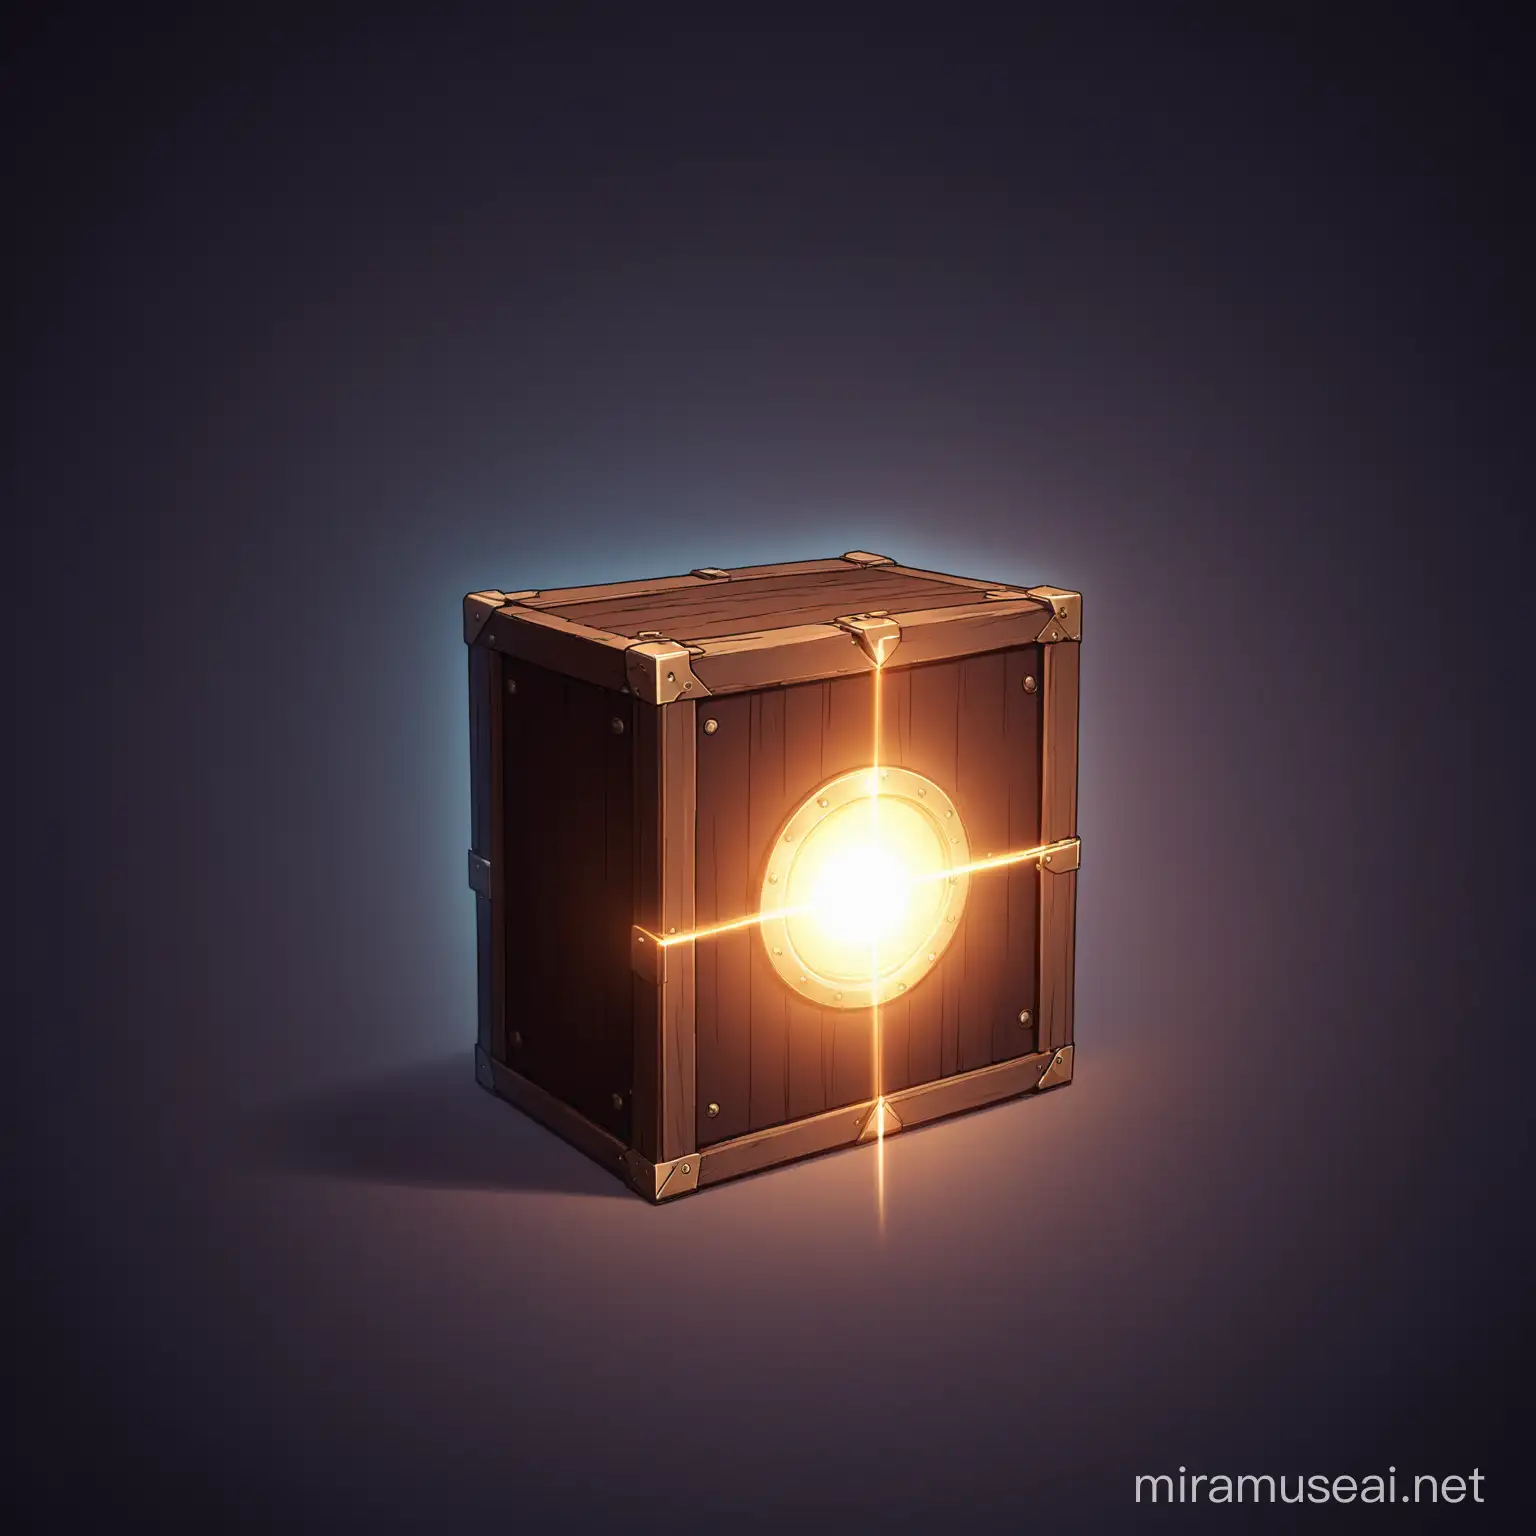 generate open chest with mystery  light like you cant see anything in it. make chest front of camera